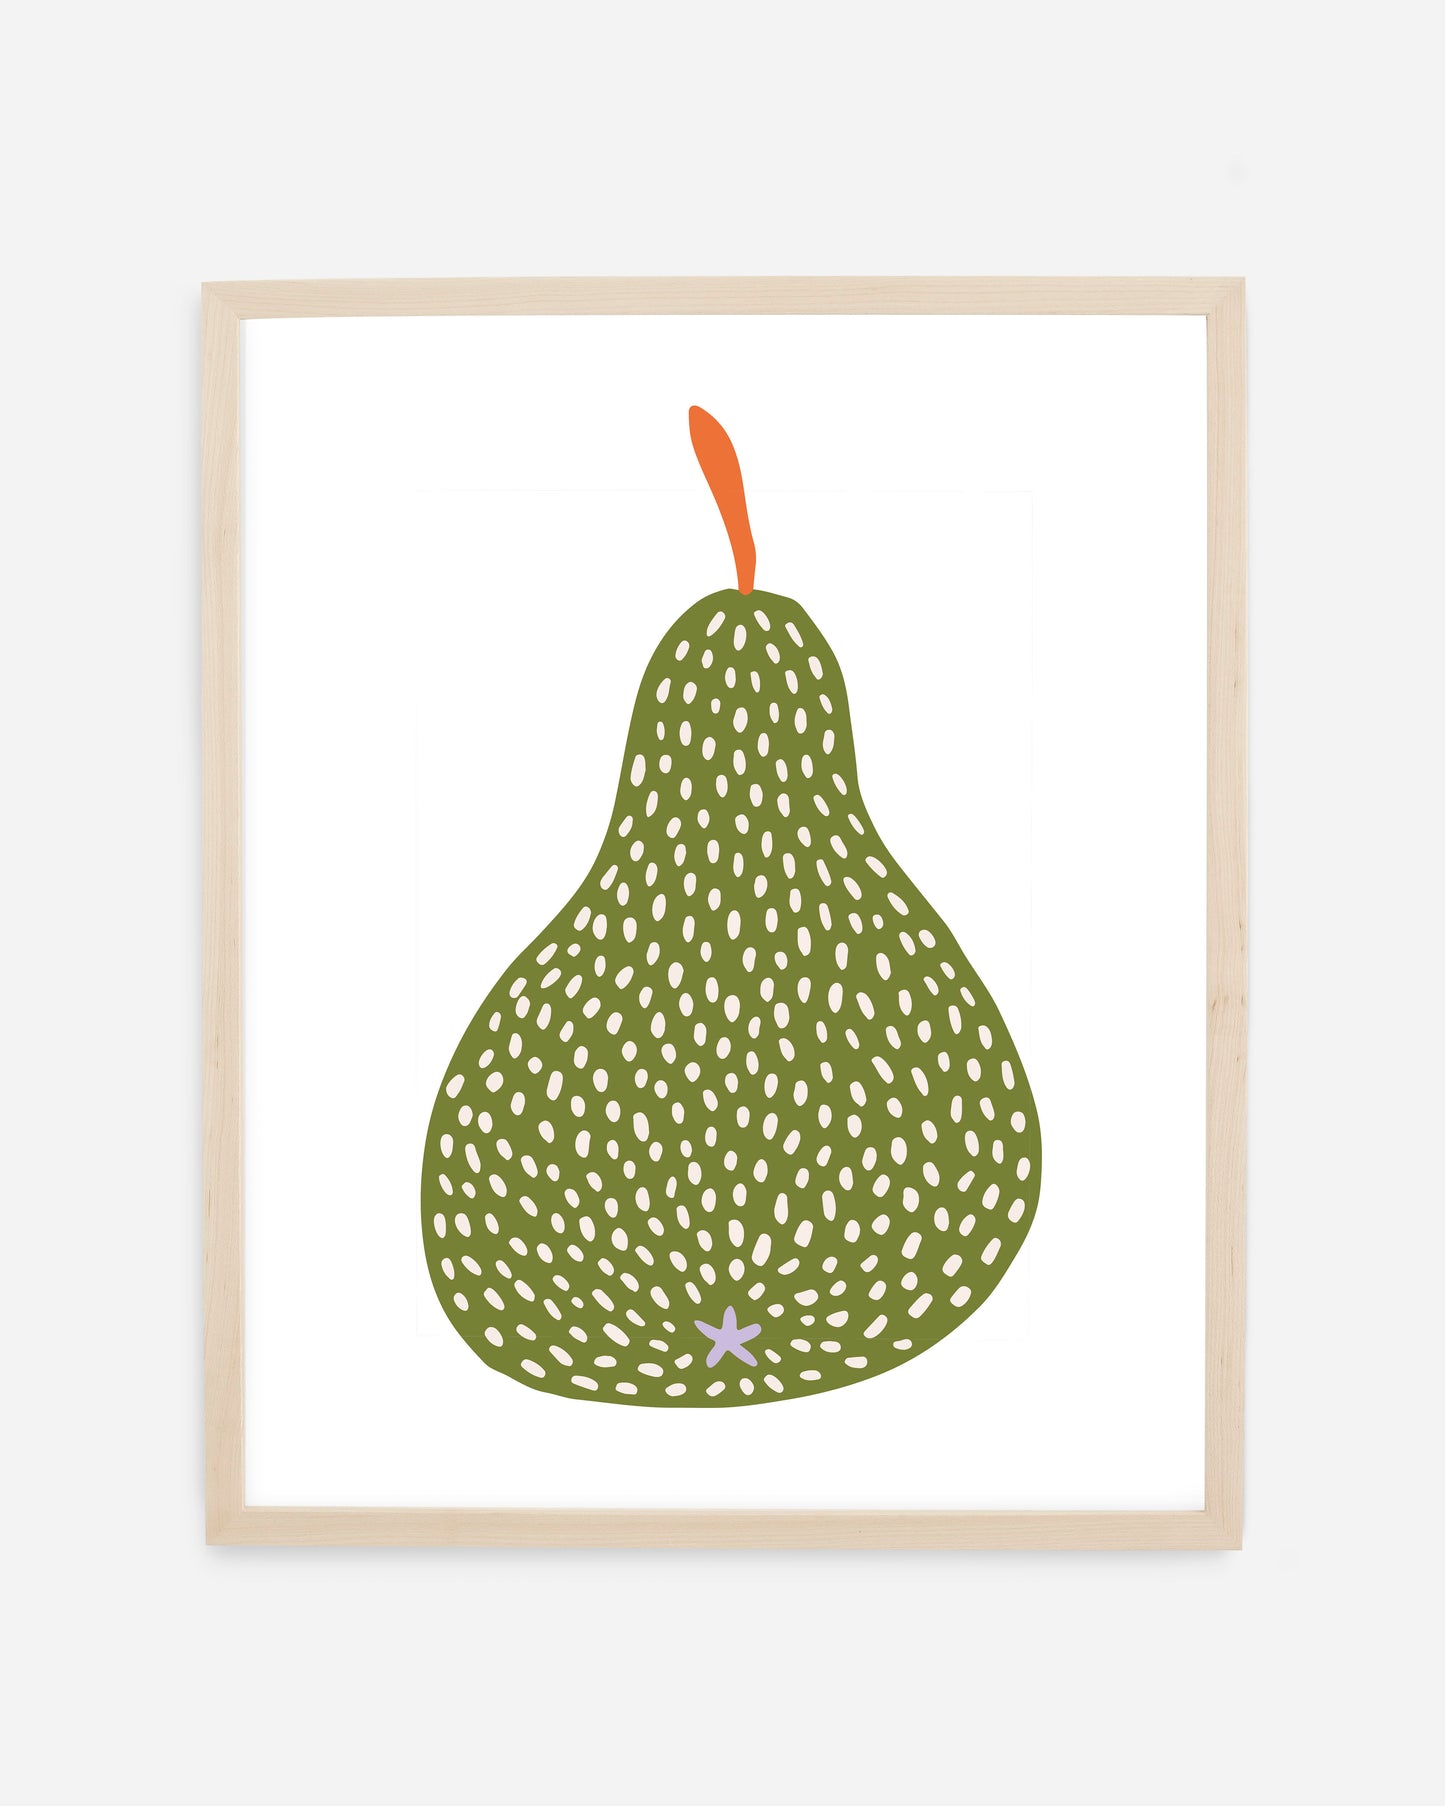 Pear Illustration by Freckled as a fine art giclee print. Printed in the USA on warm-white, 100% cotton archival paper.